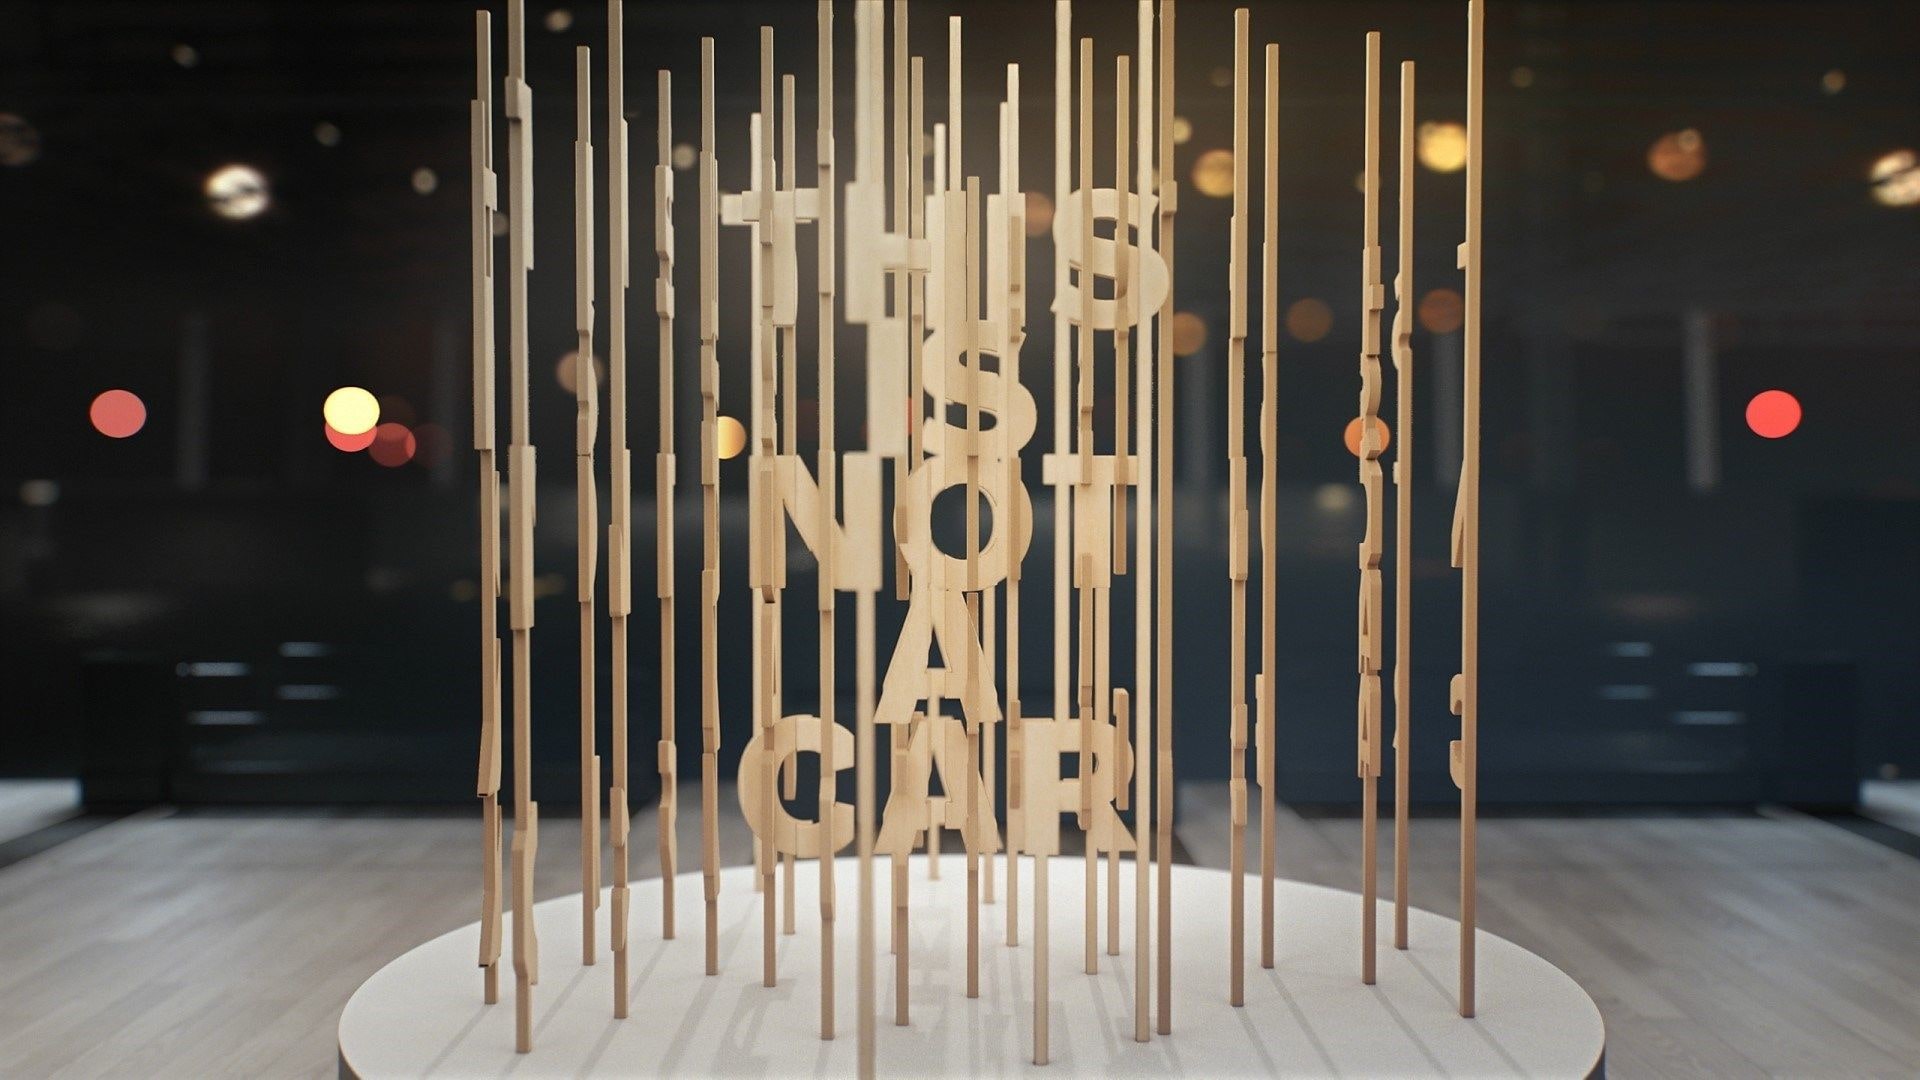 Volvo's "This is not a car" statement for 2018 LA auto show